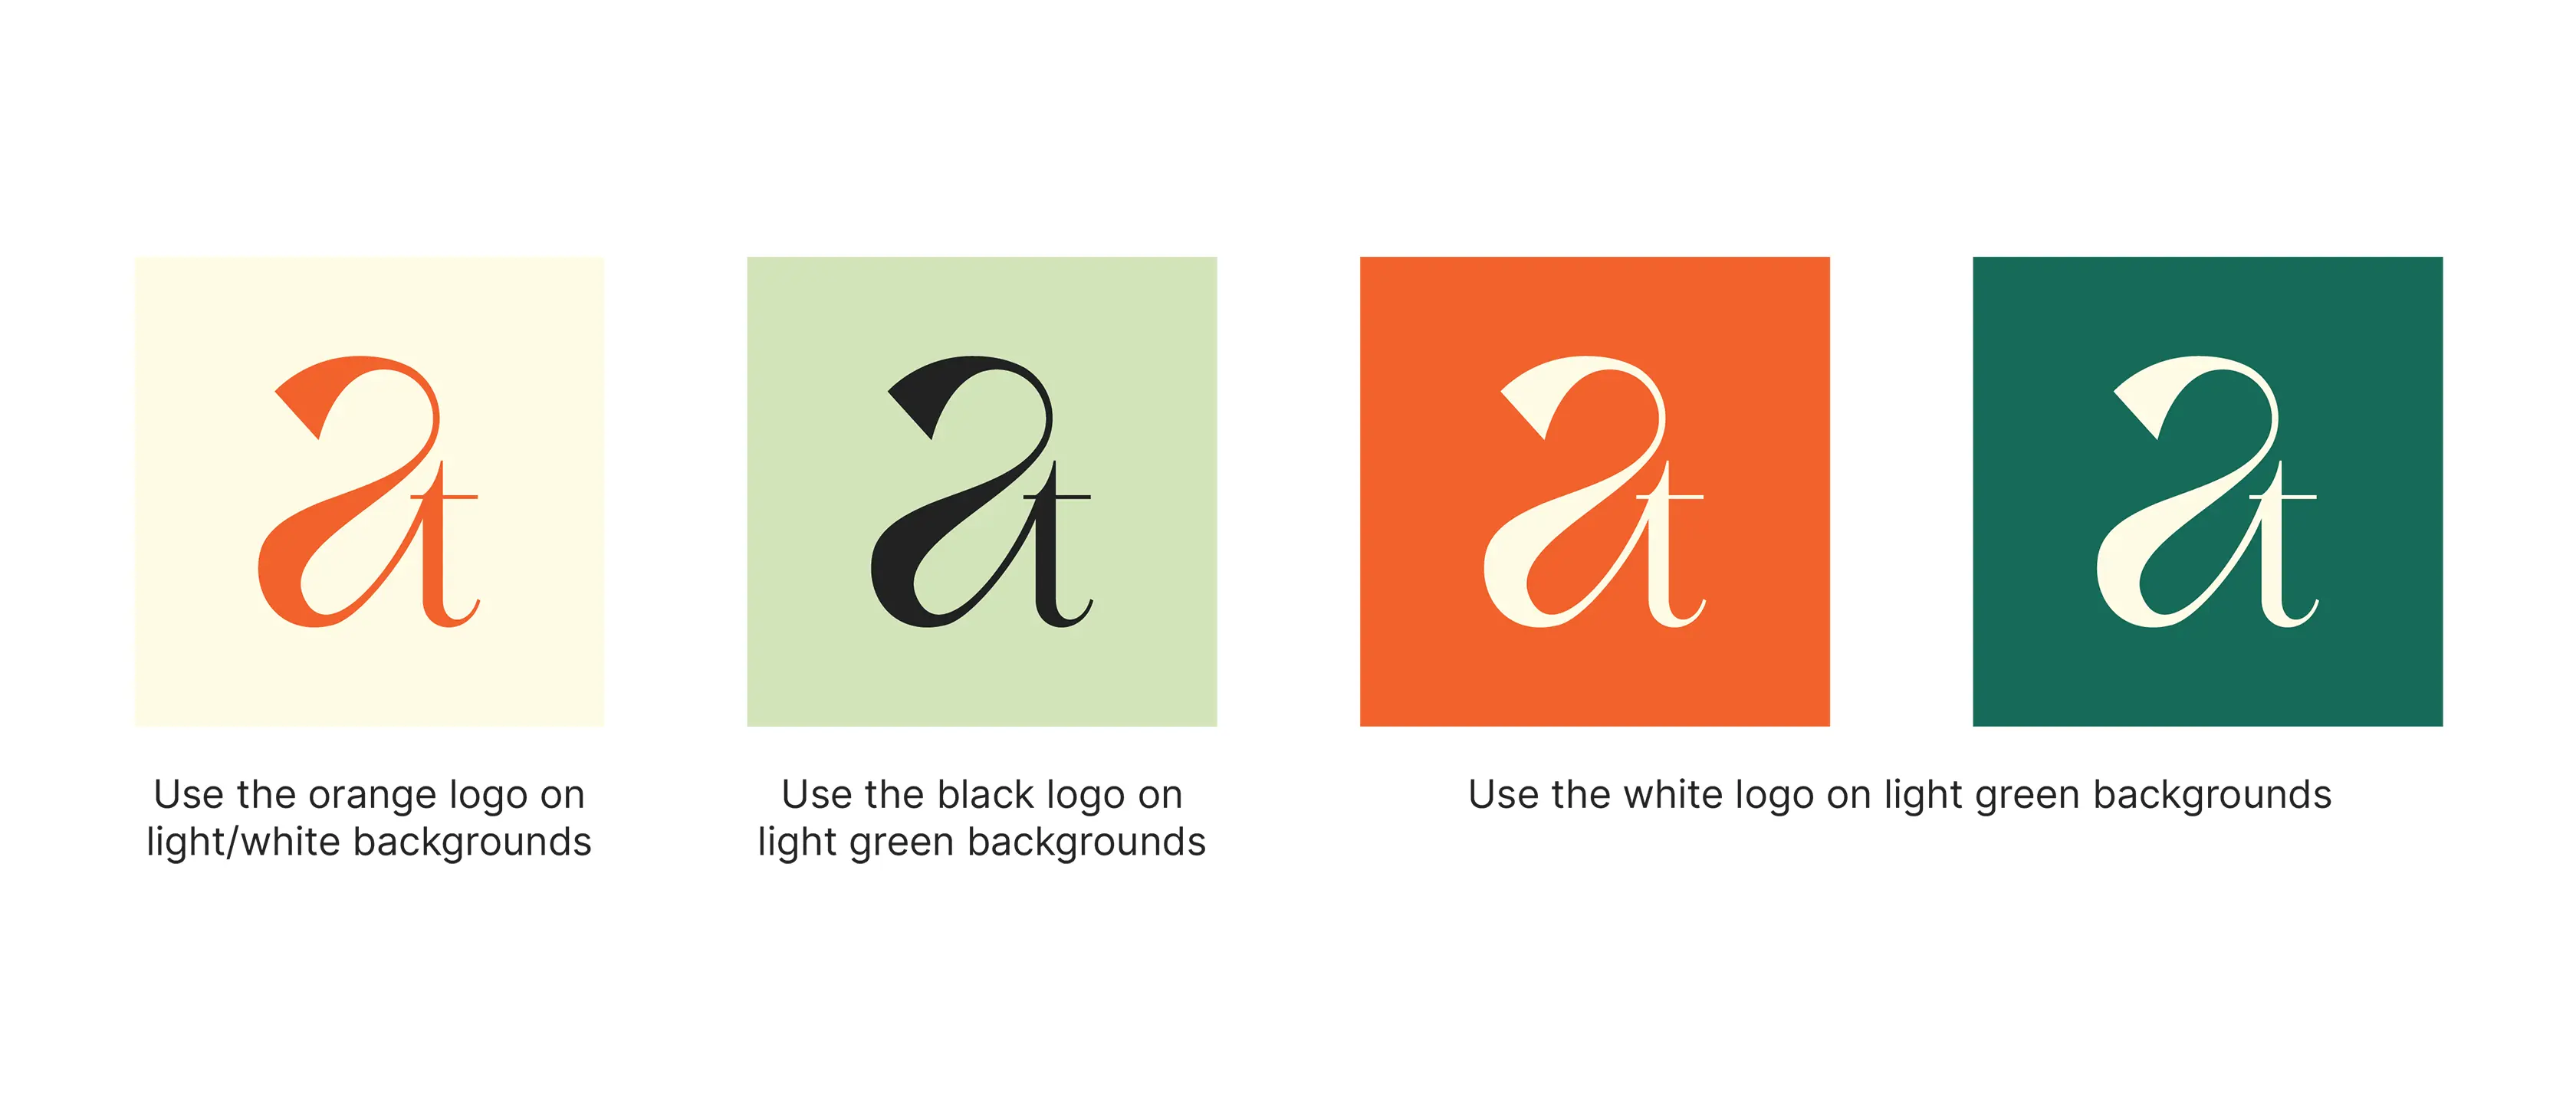 How to use the logo on differently colored backgrounds